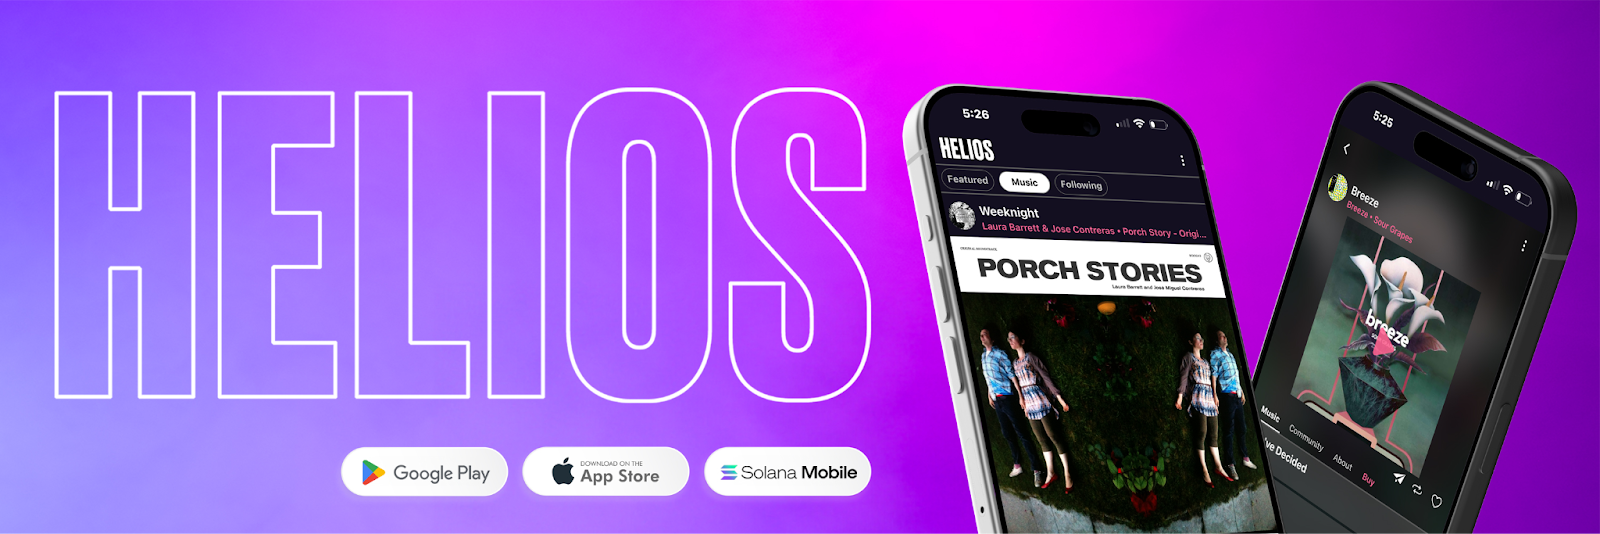 Powered by Solana, Helios App Brings the Web3 Party to Music Streaming